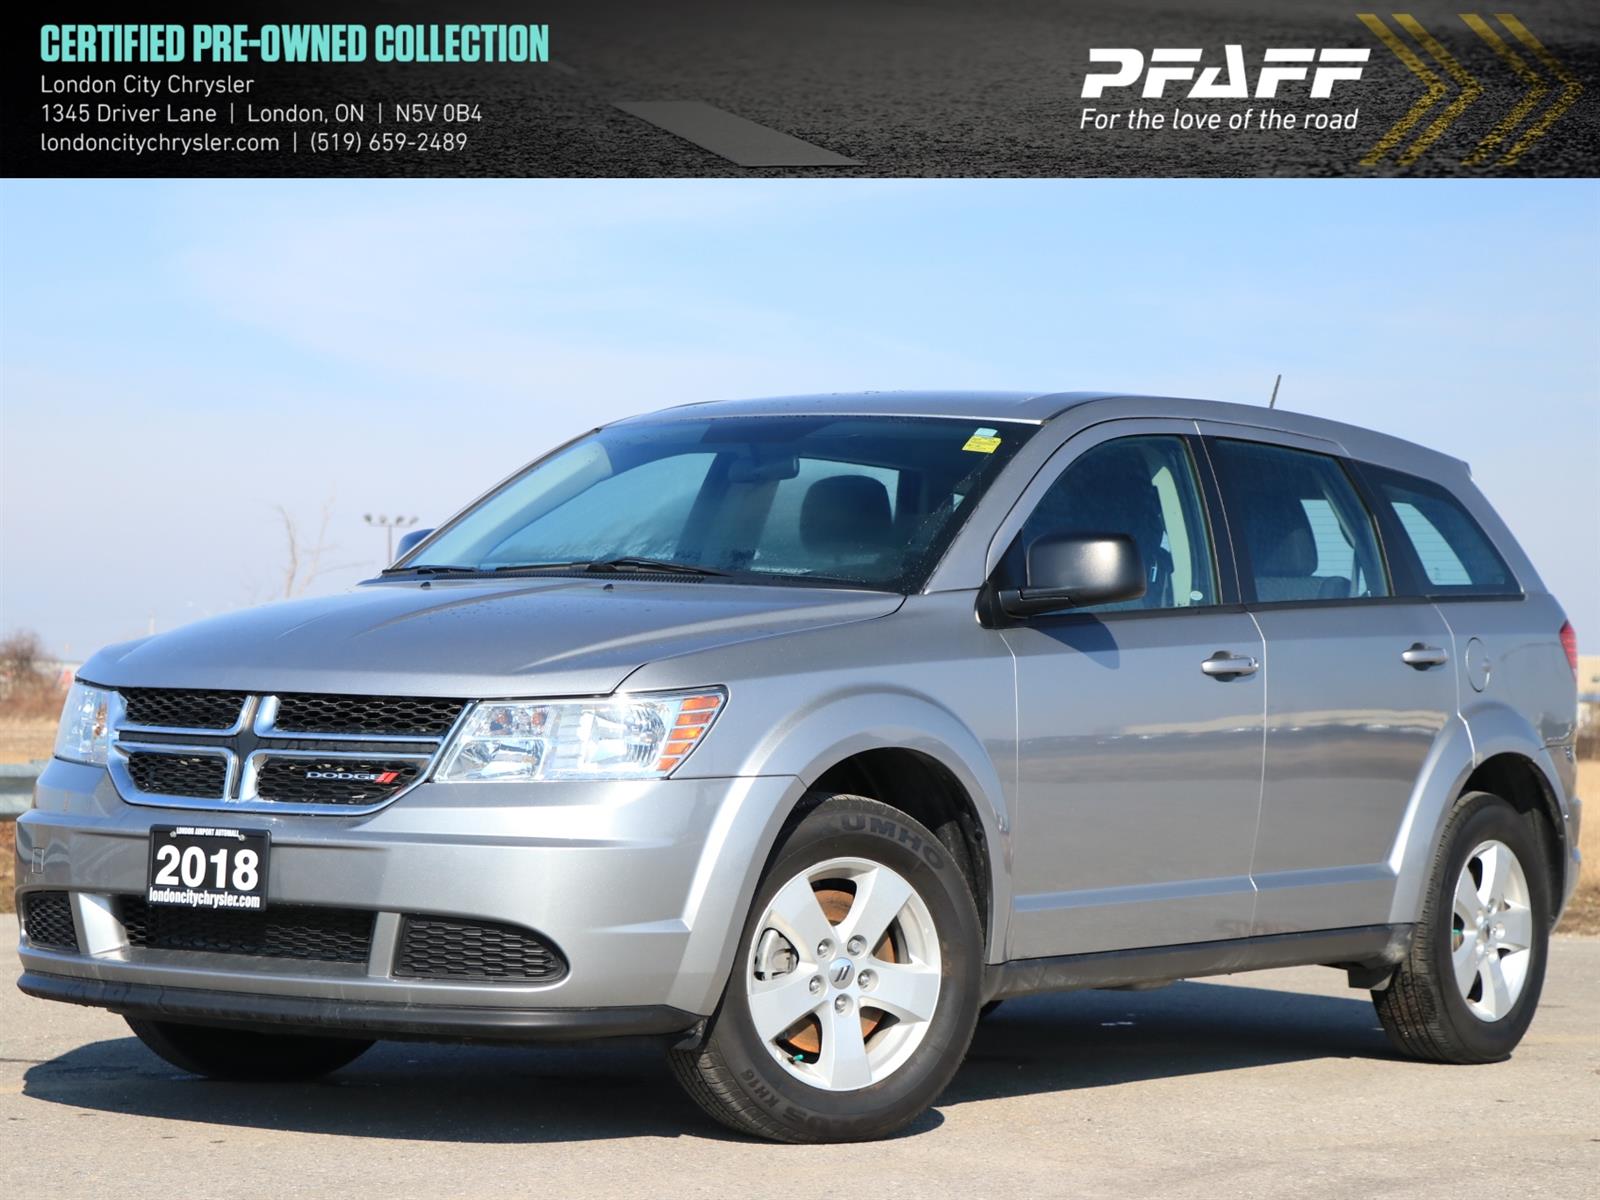  Dodge Journey SE! Uconnect, 4.3 Touchscreen Display!!